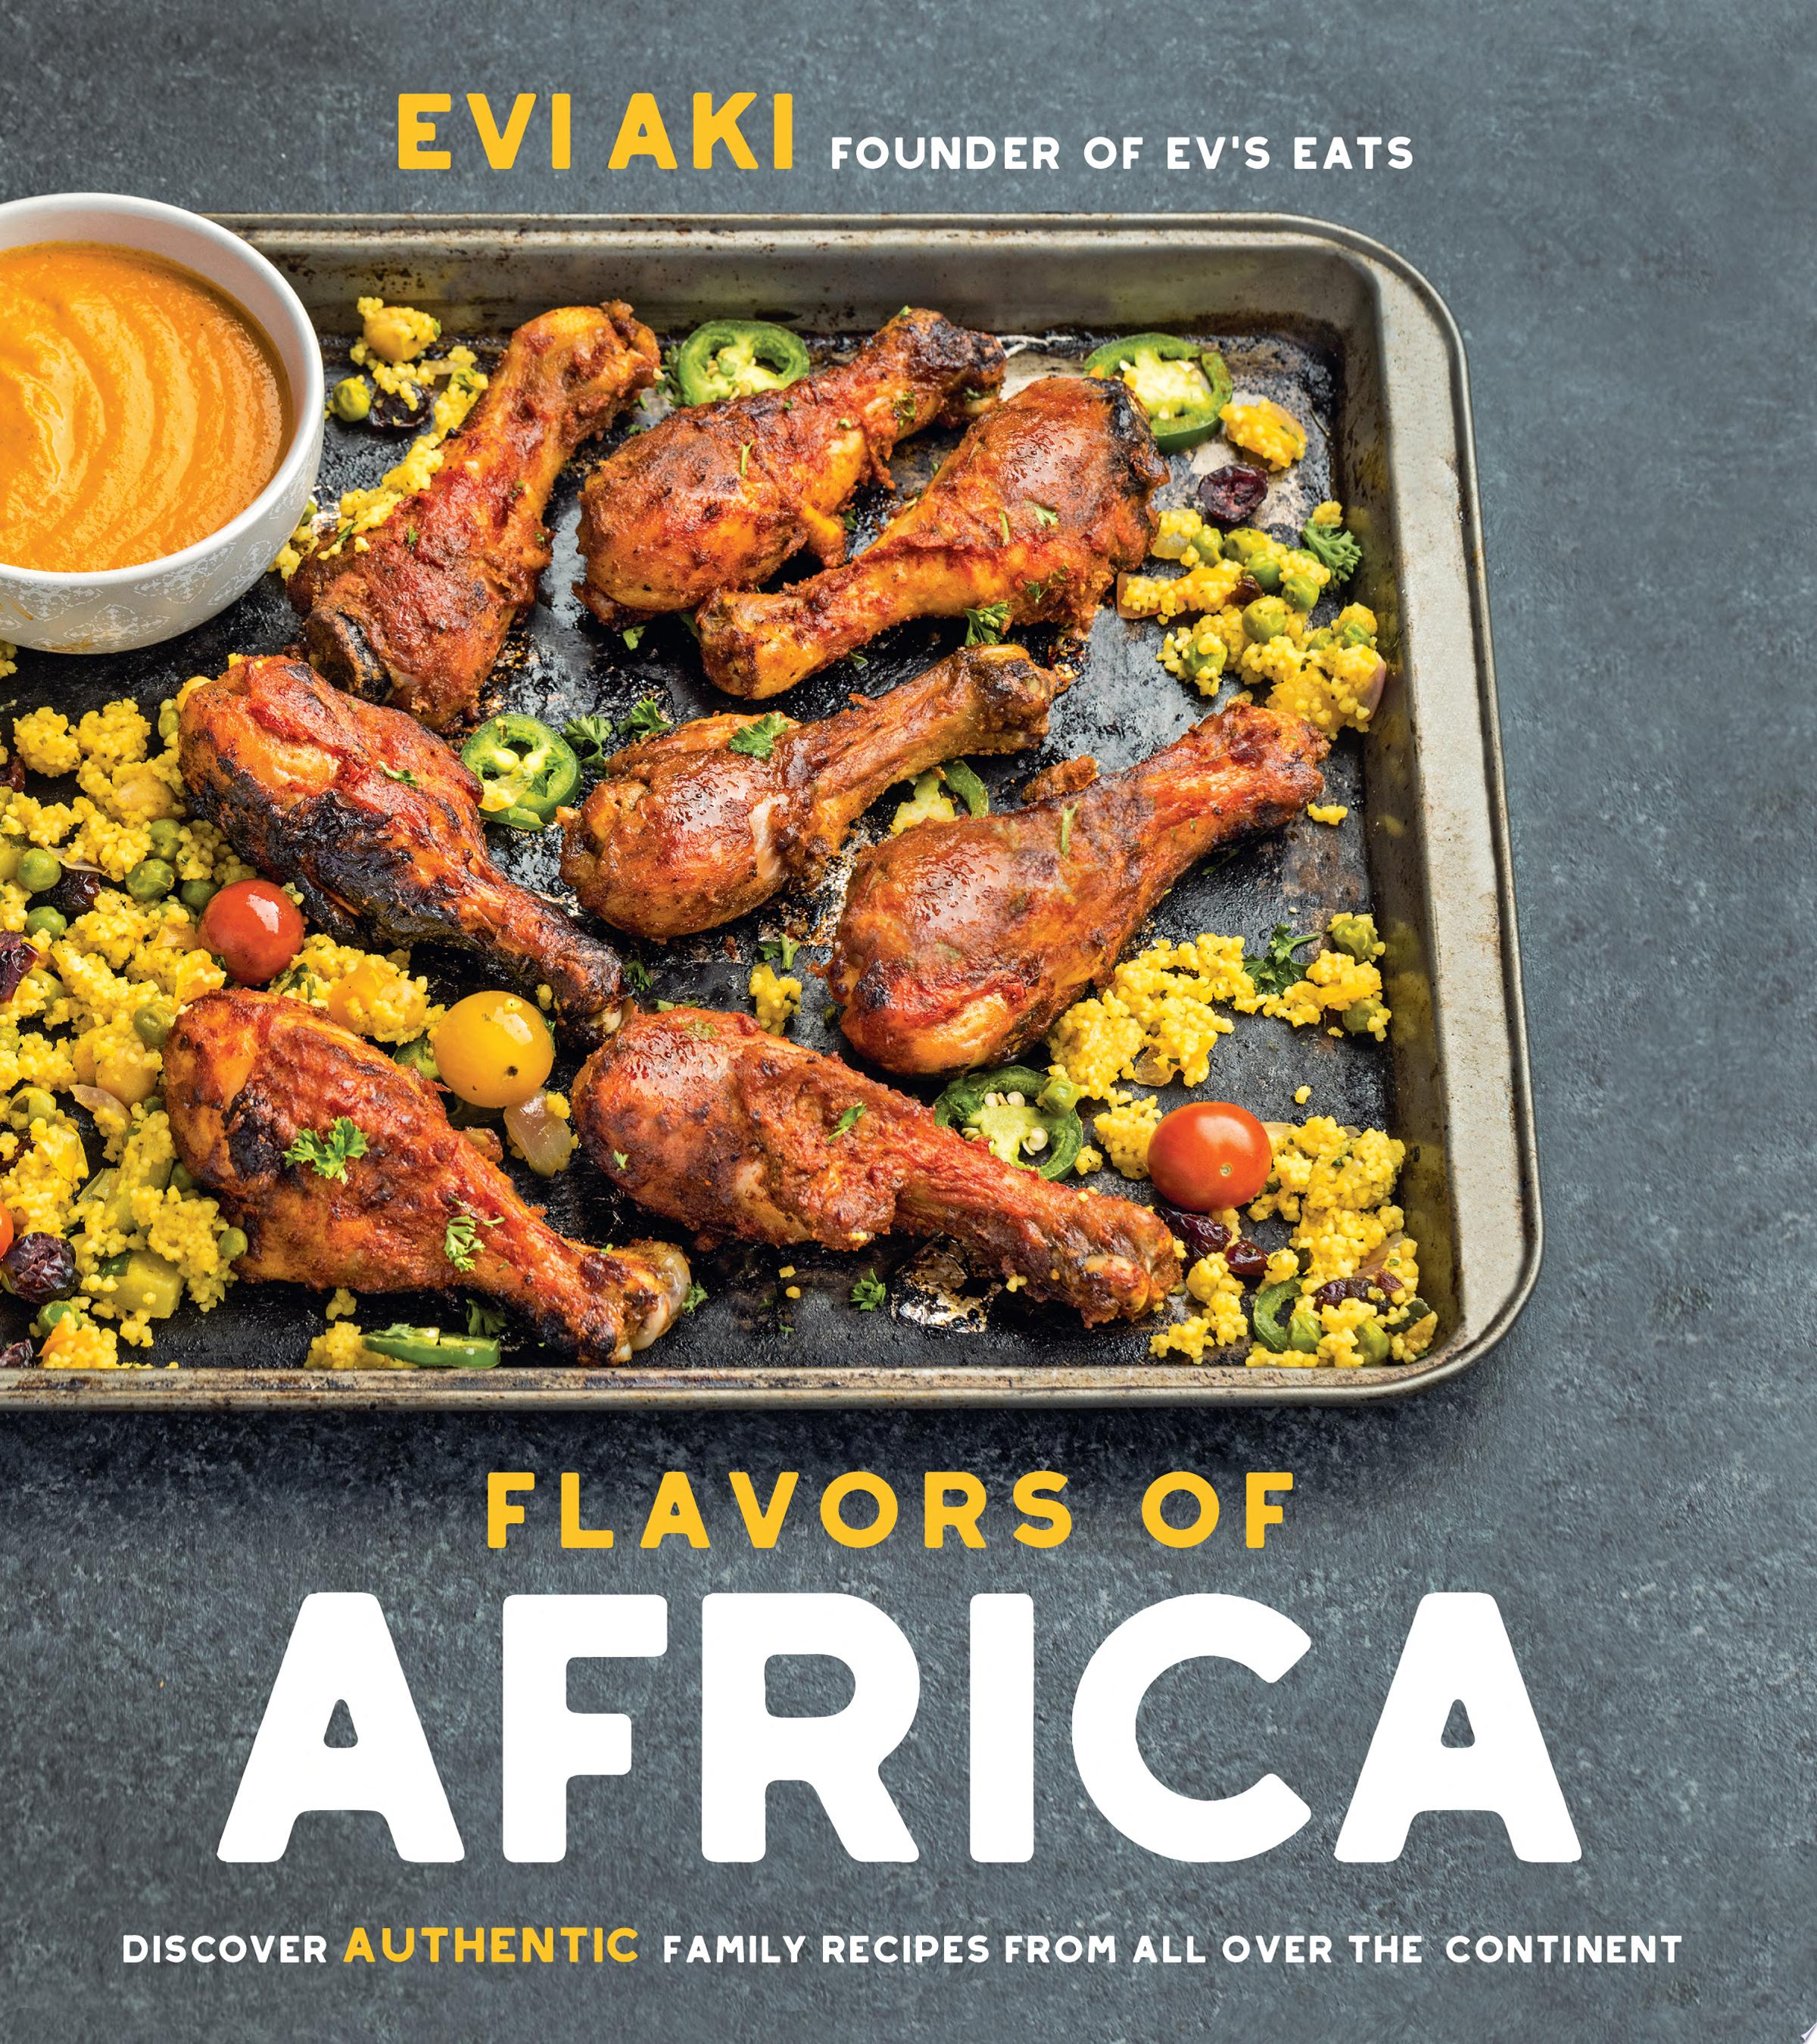 Image for "Flavors of Africa"